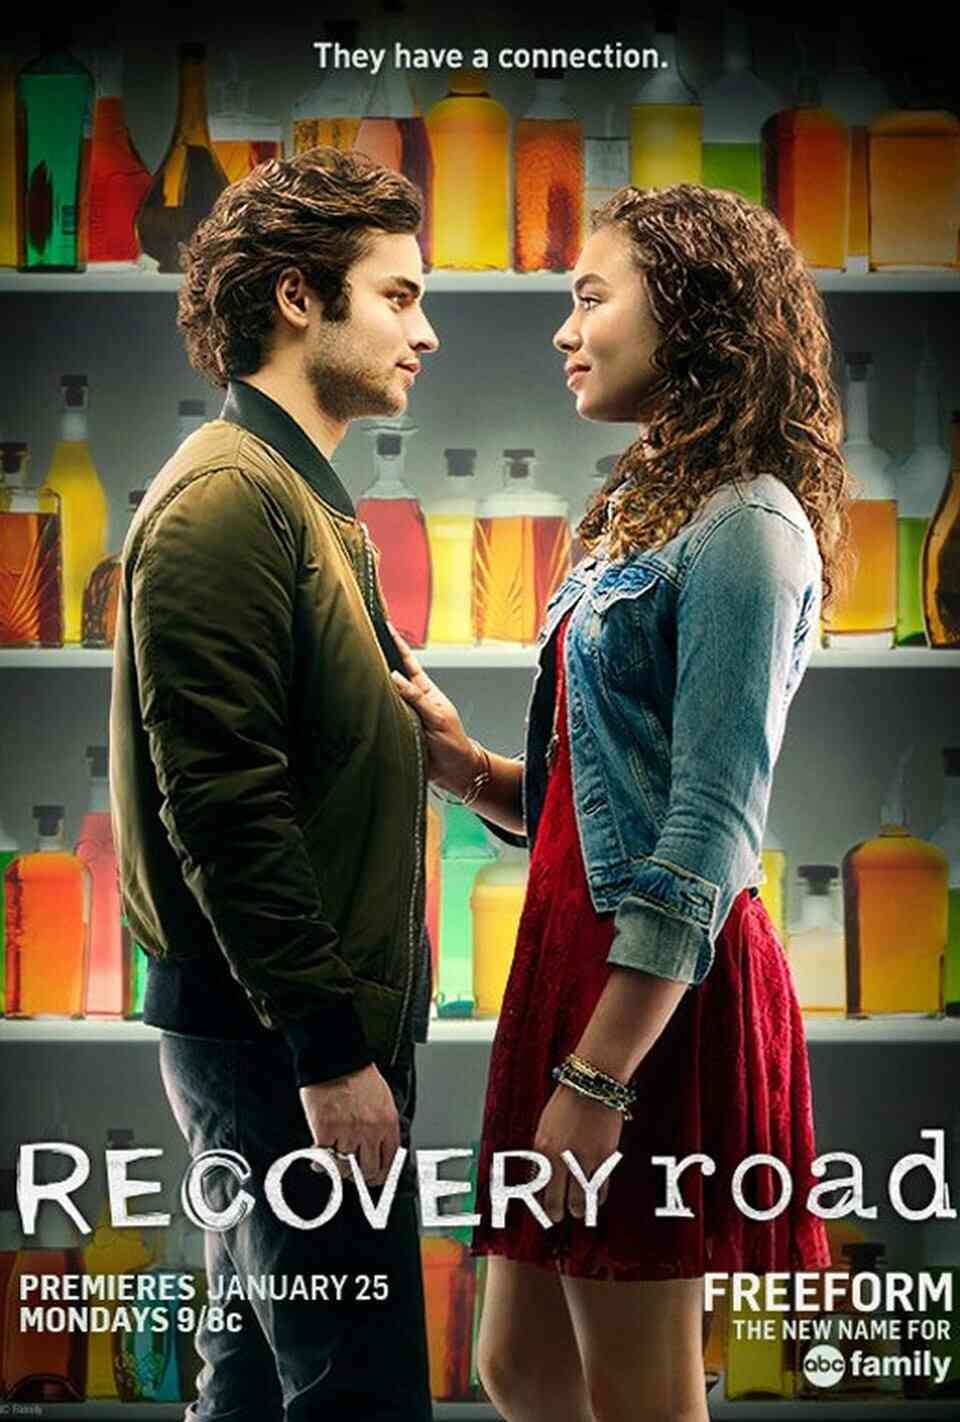 Read Recovery Road screenplay (poster)